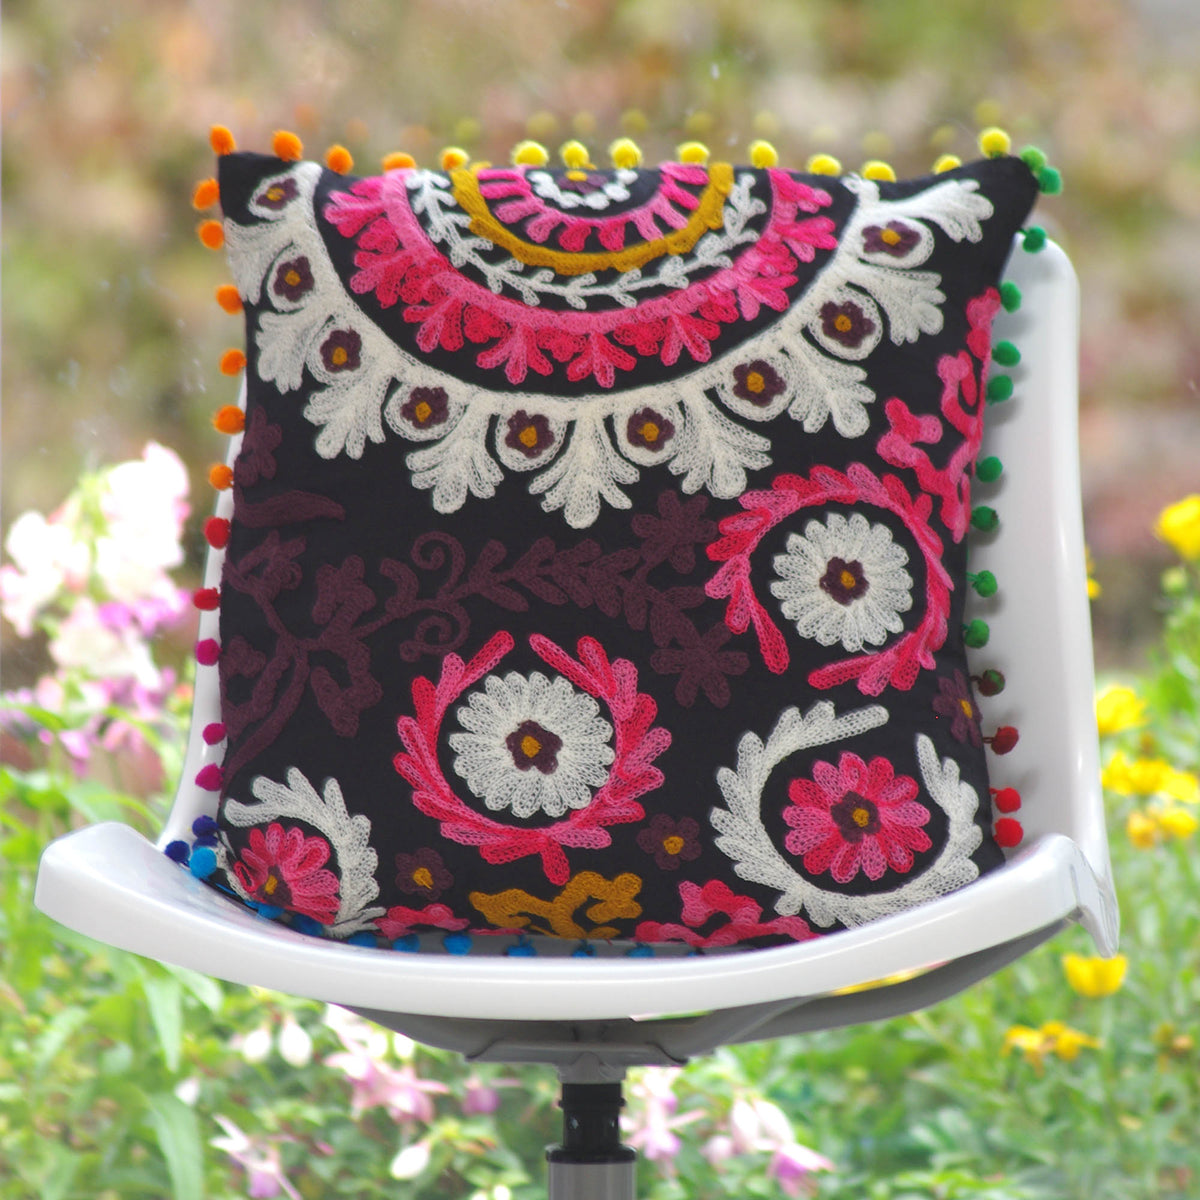 Decorative Suzani Floral Print & Woolen Embroidered Cotton Cushion Cover With Pom Pom- Black White